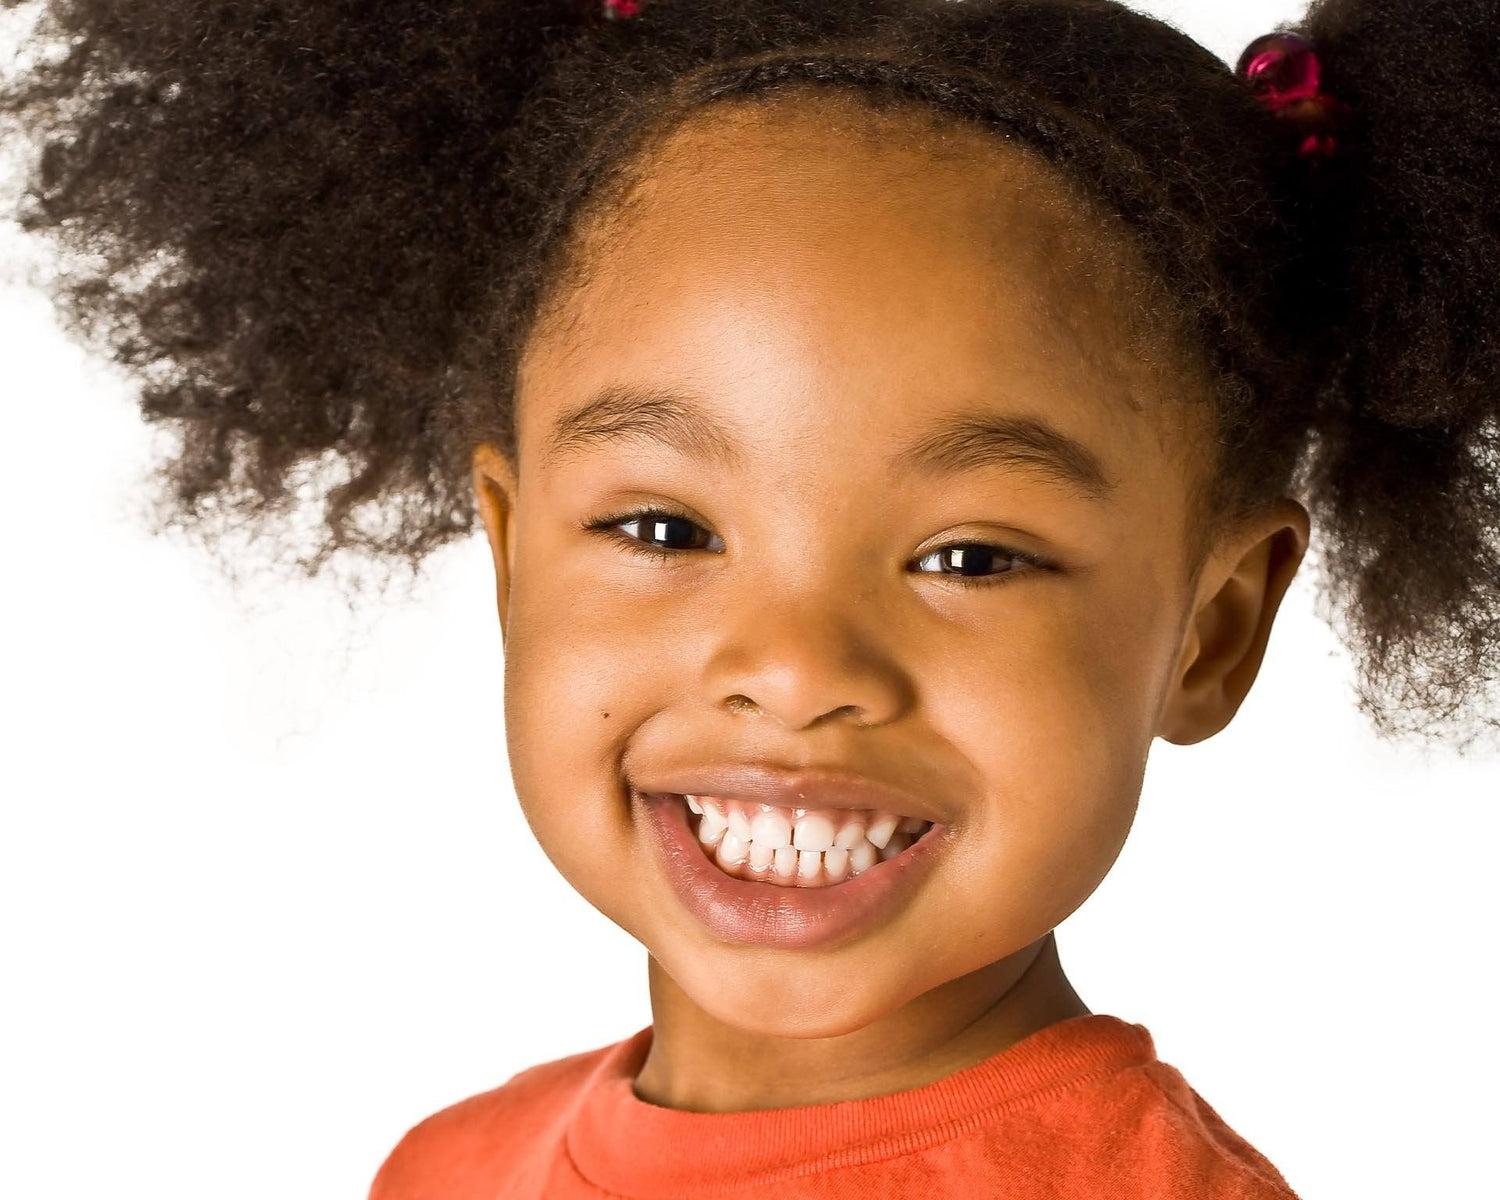 How to care for your child's afro hair to prevent nits and head lice